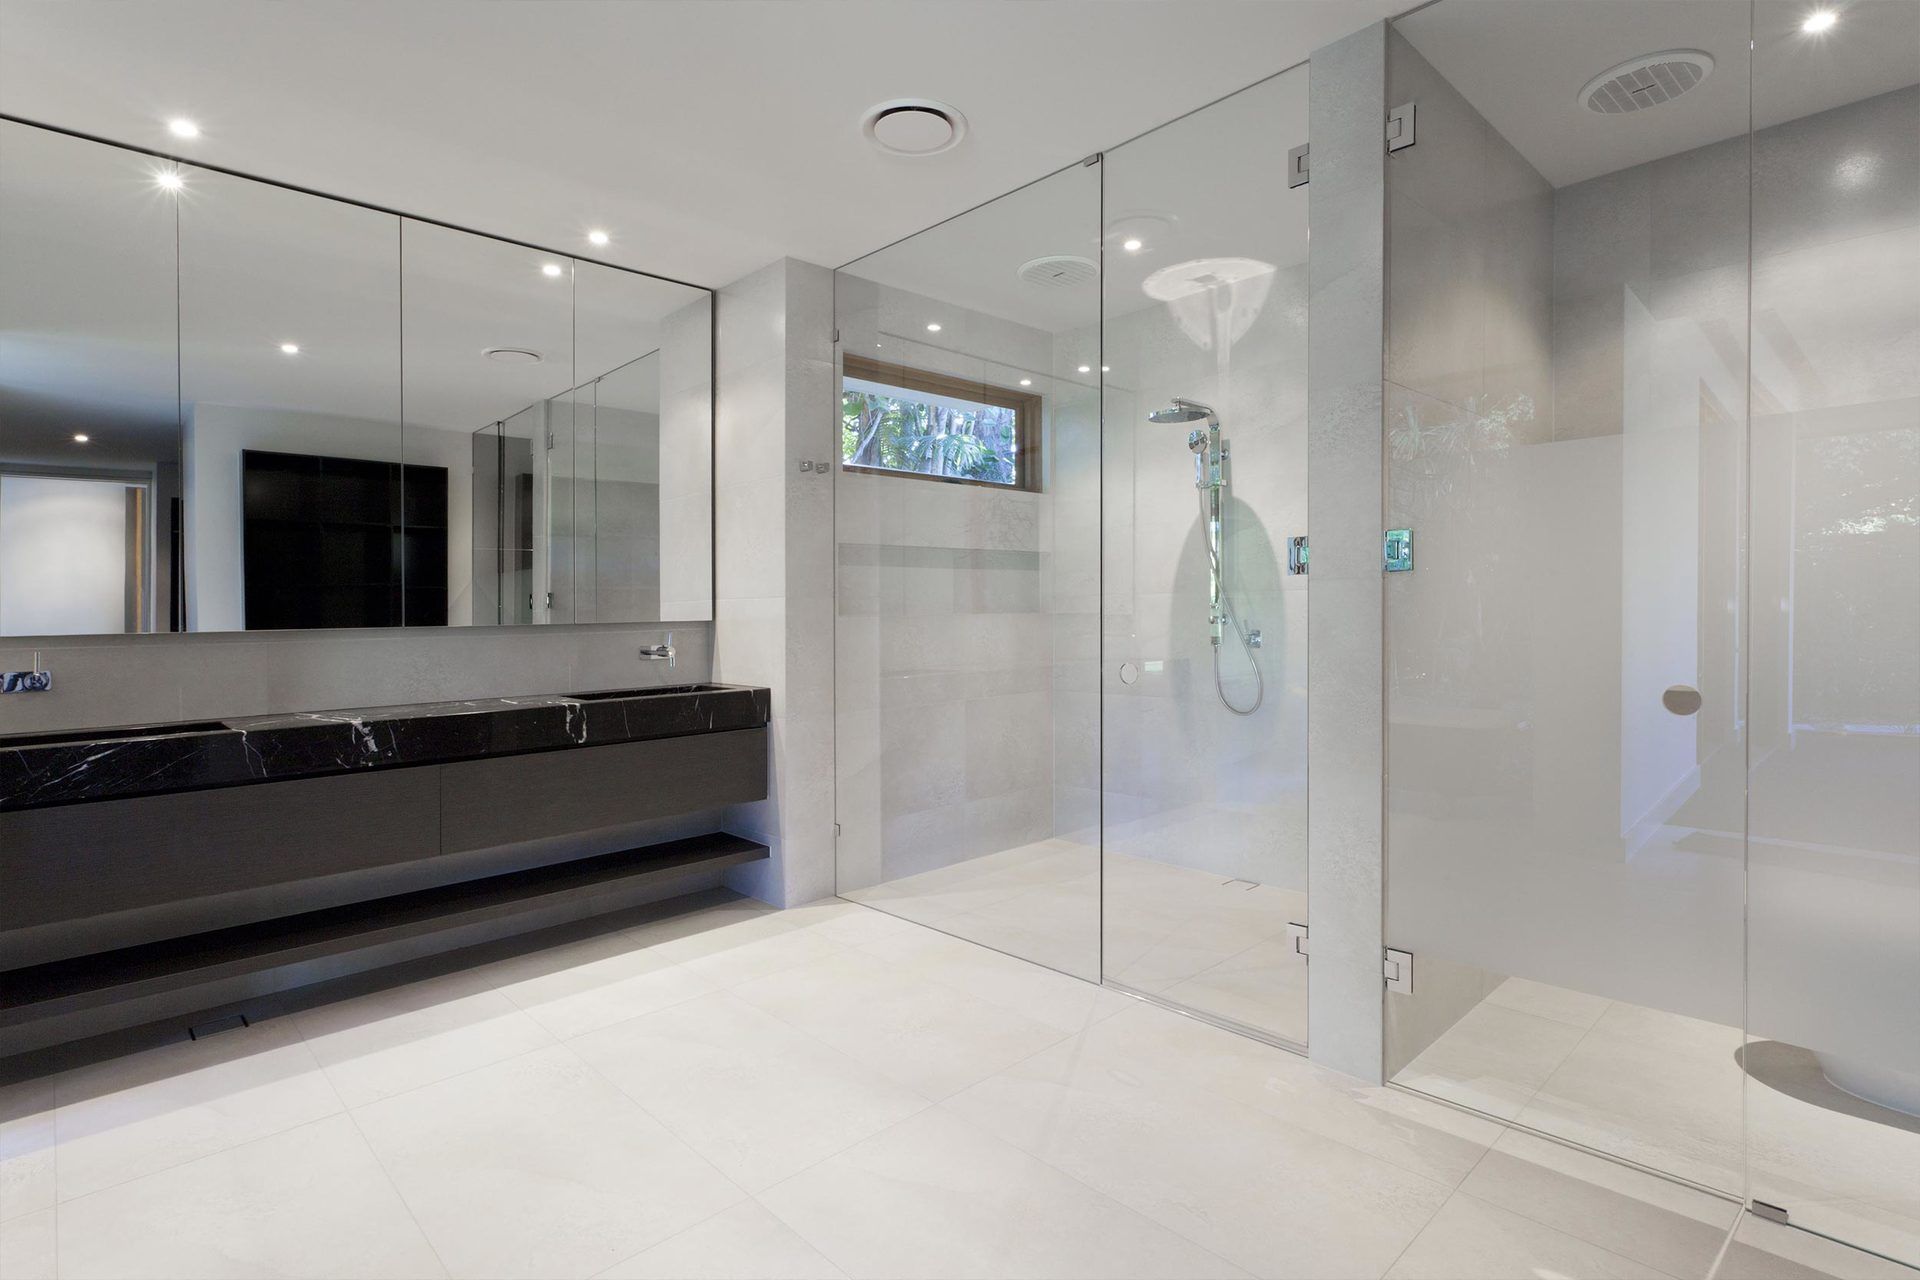 Shower glass and mirror